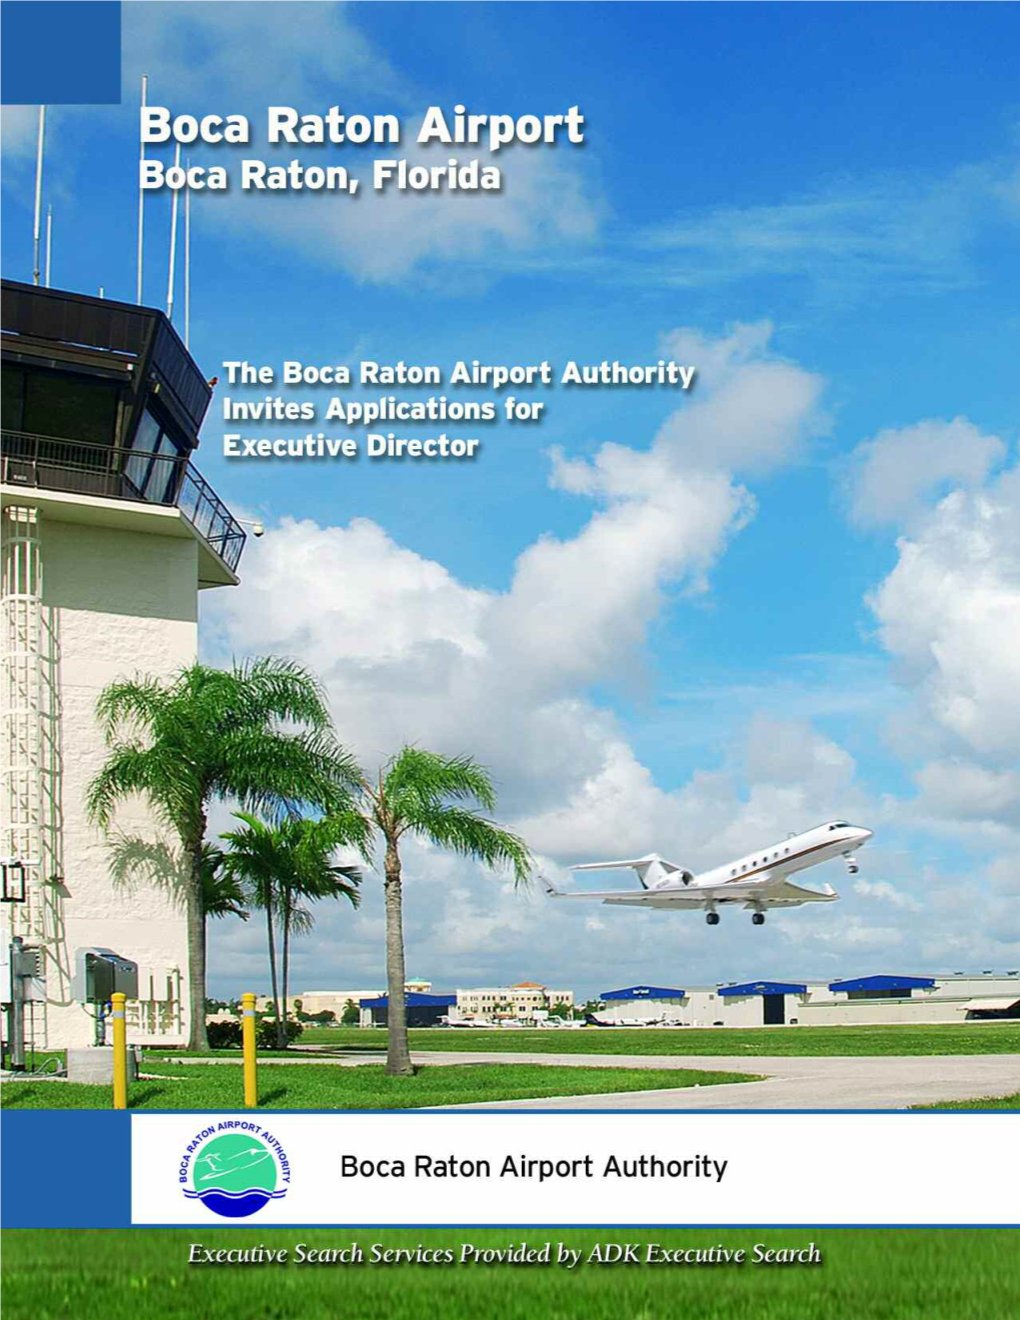 THE AIRPORT the Boca Raton Airport Authority (BRAA) Operates the Boca Raton Airport (BCT) Located Halfway Between West Palm Beach and Ft